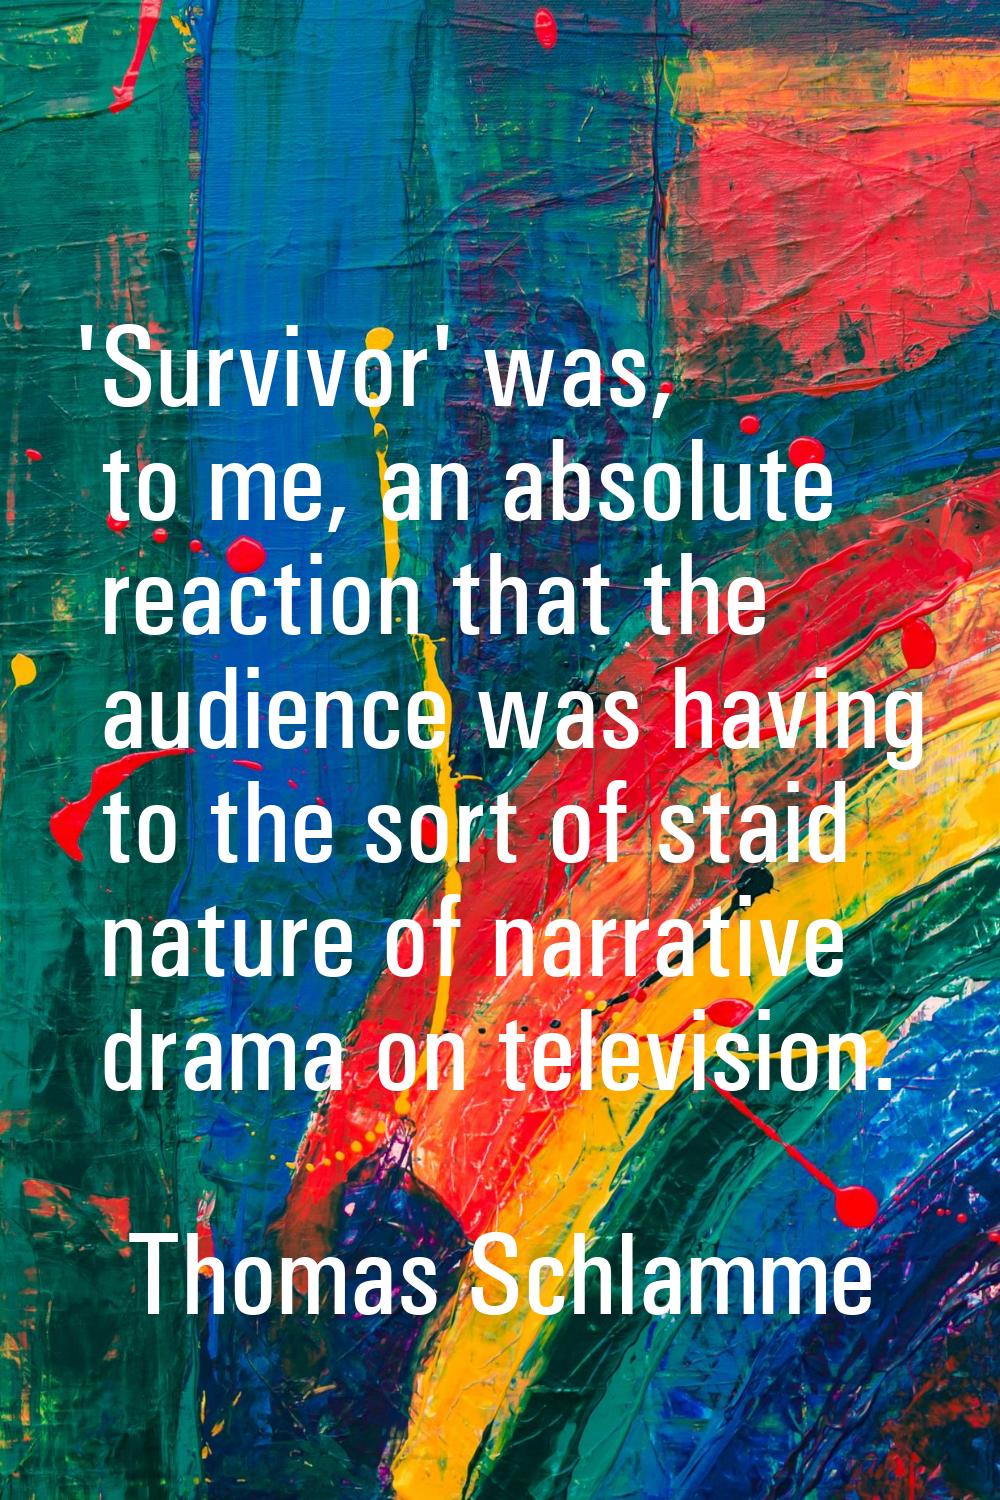 'Survivor' was, to me, an absolute reaction that the audience was having to the sort of staid natur